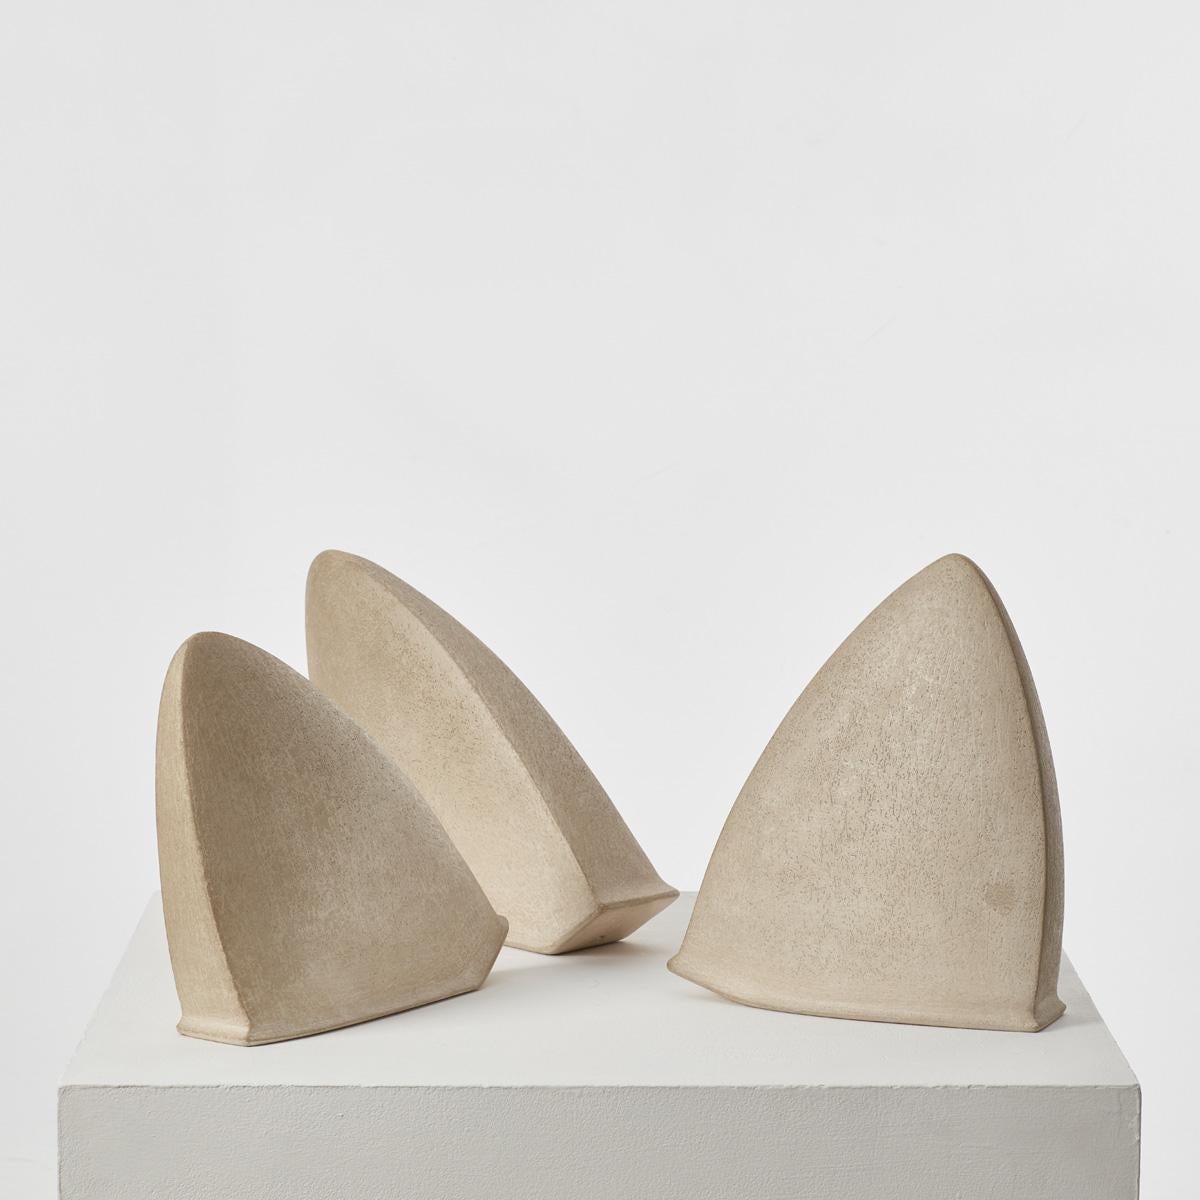 Modern Set of Three ‘Shark Fin’ Sculptures from the Collection of Sir Terence Conran For Sale